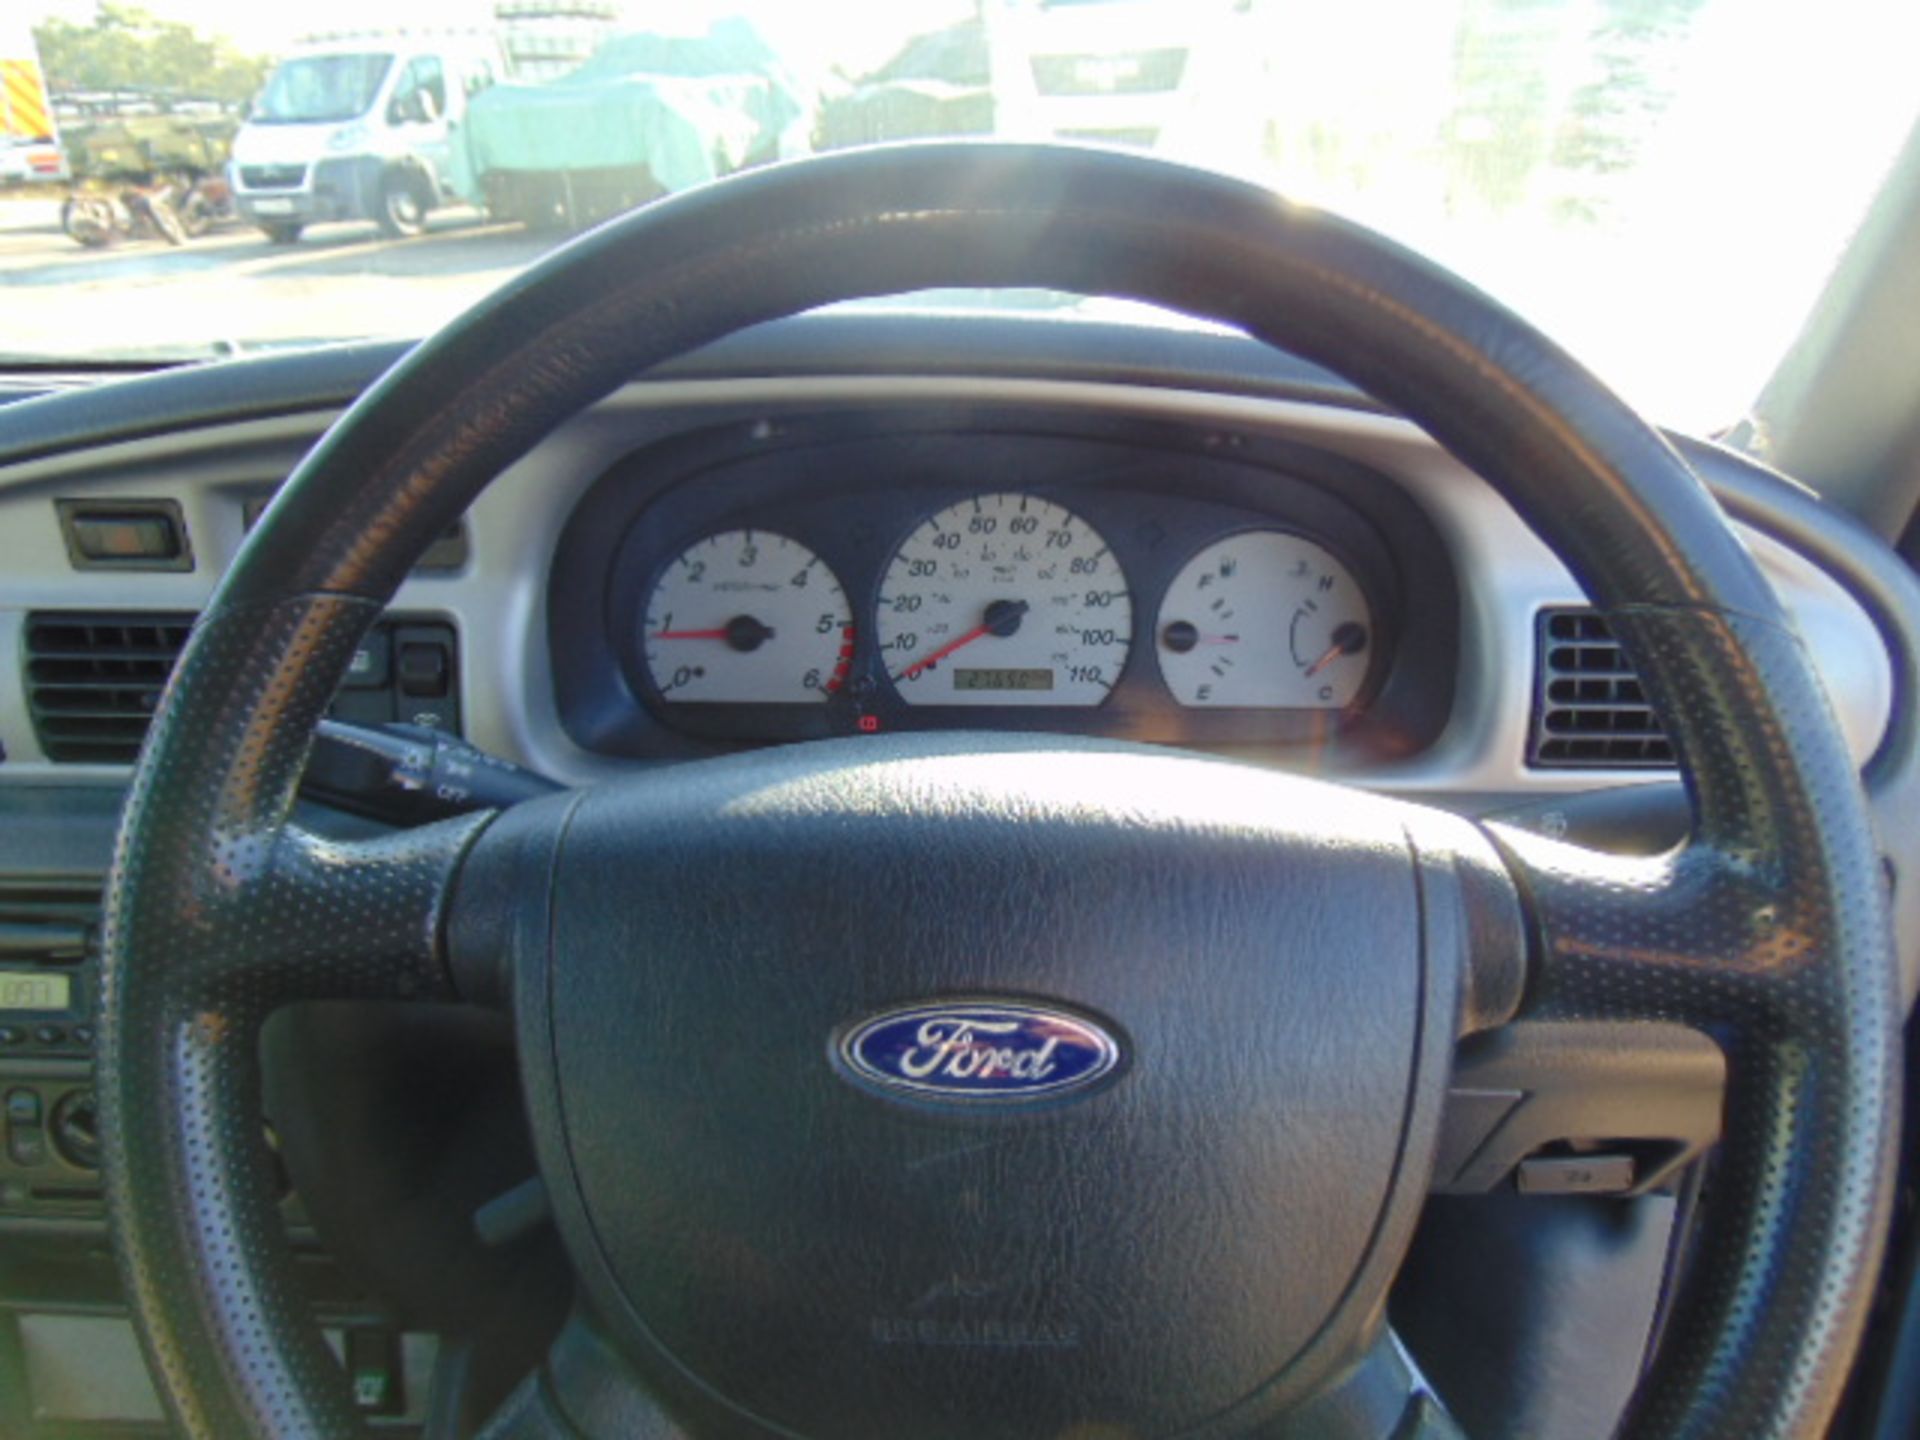 2005 Ford Ranger Double Cab 2.5TDCi 4x4 Pick Up 27,690 miles - Image 10 of 17